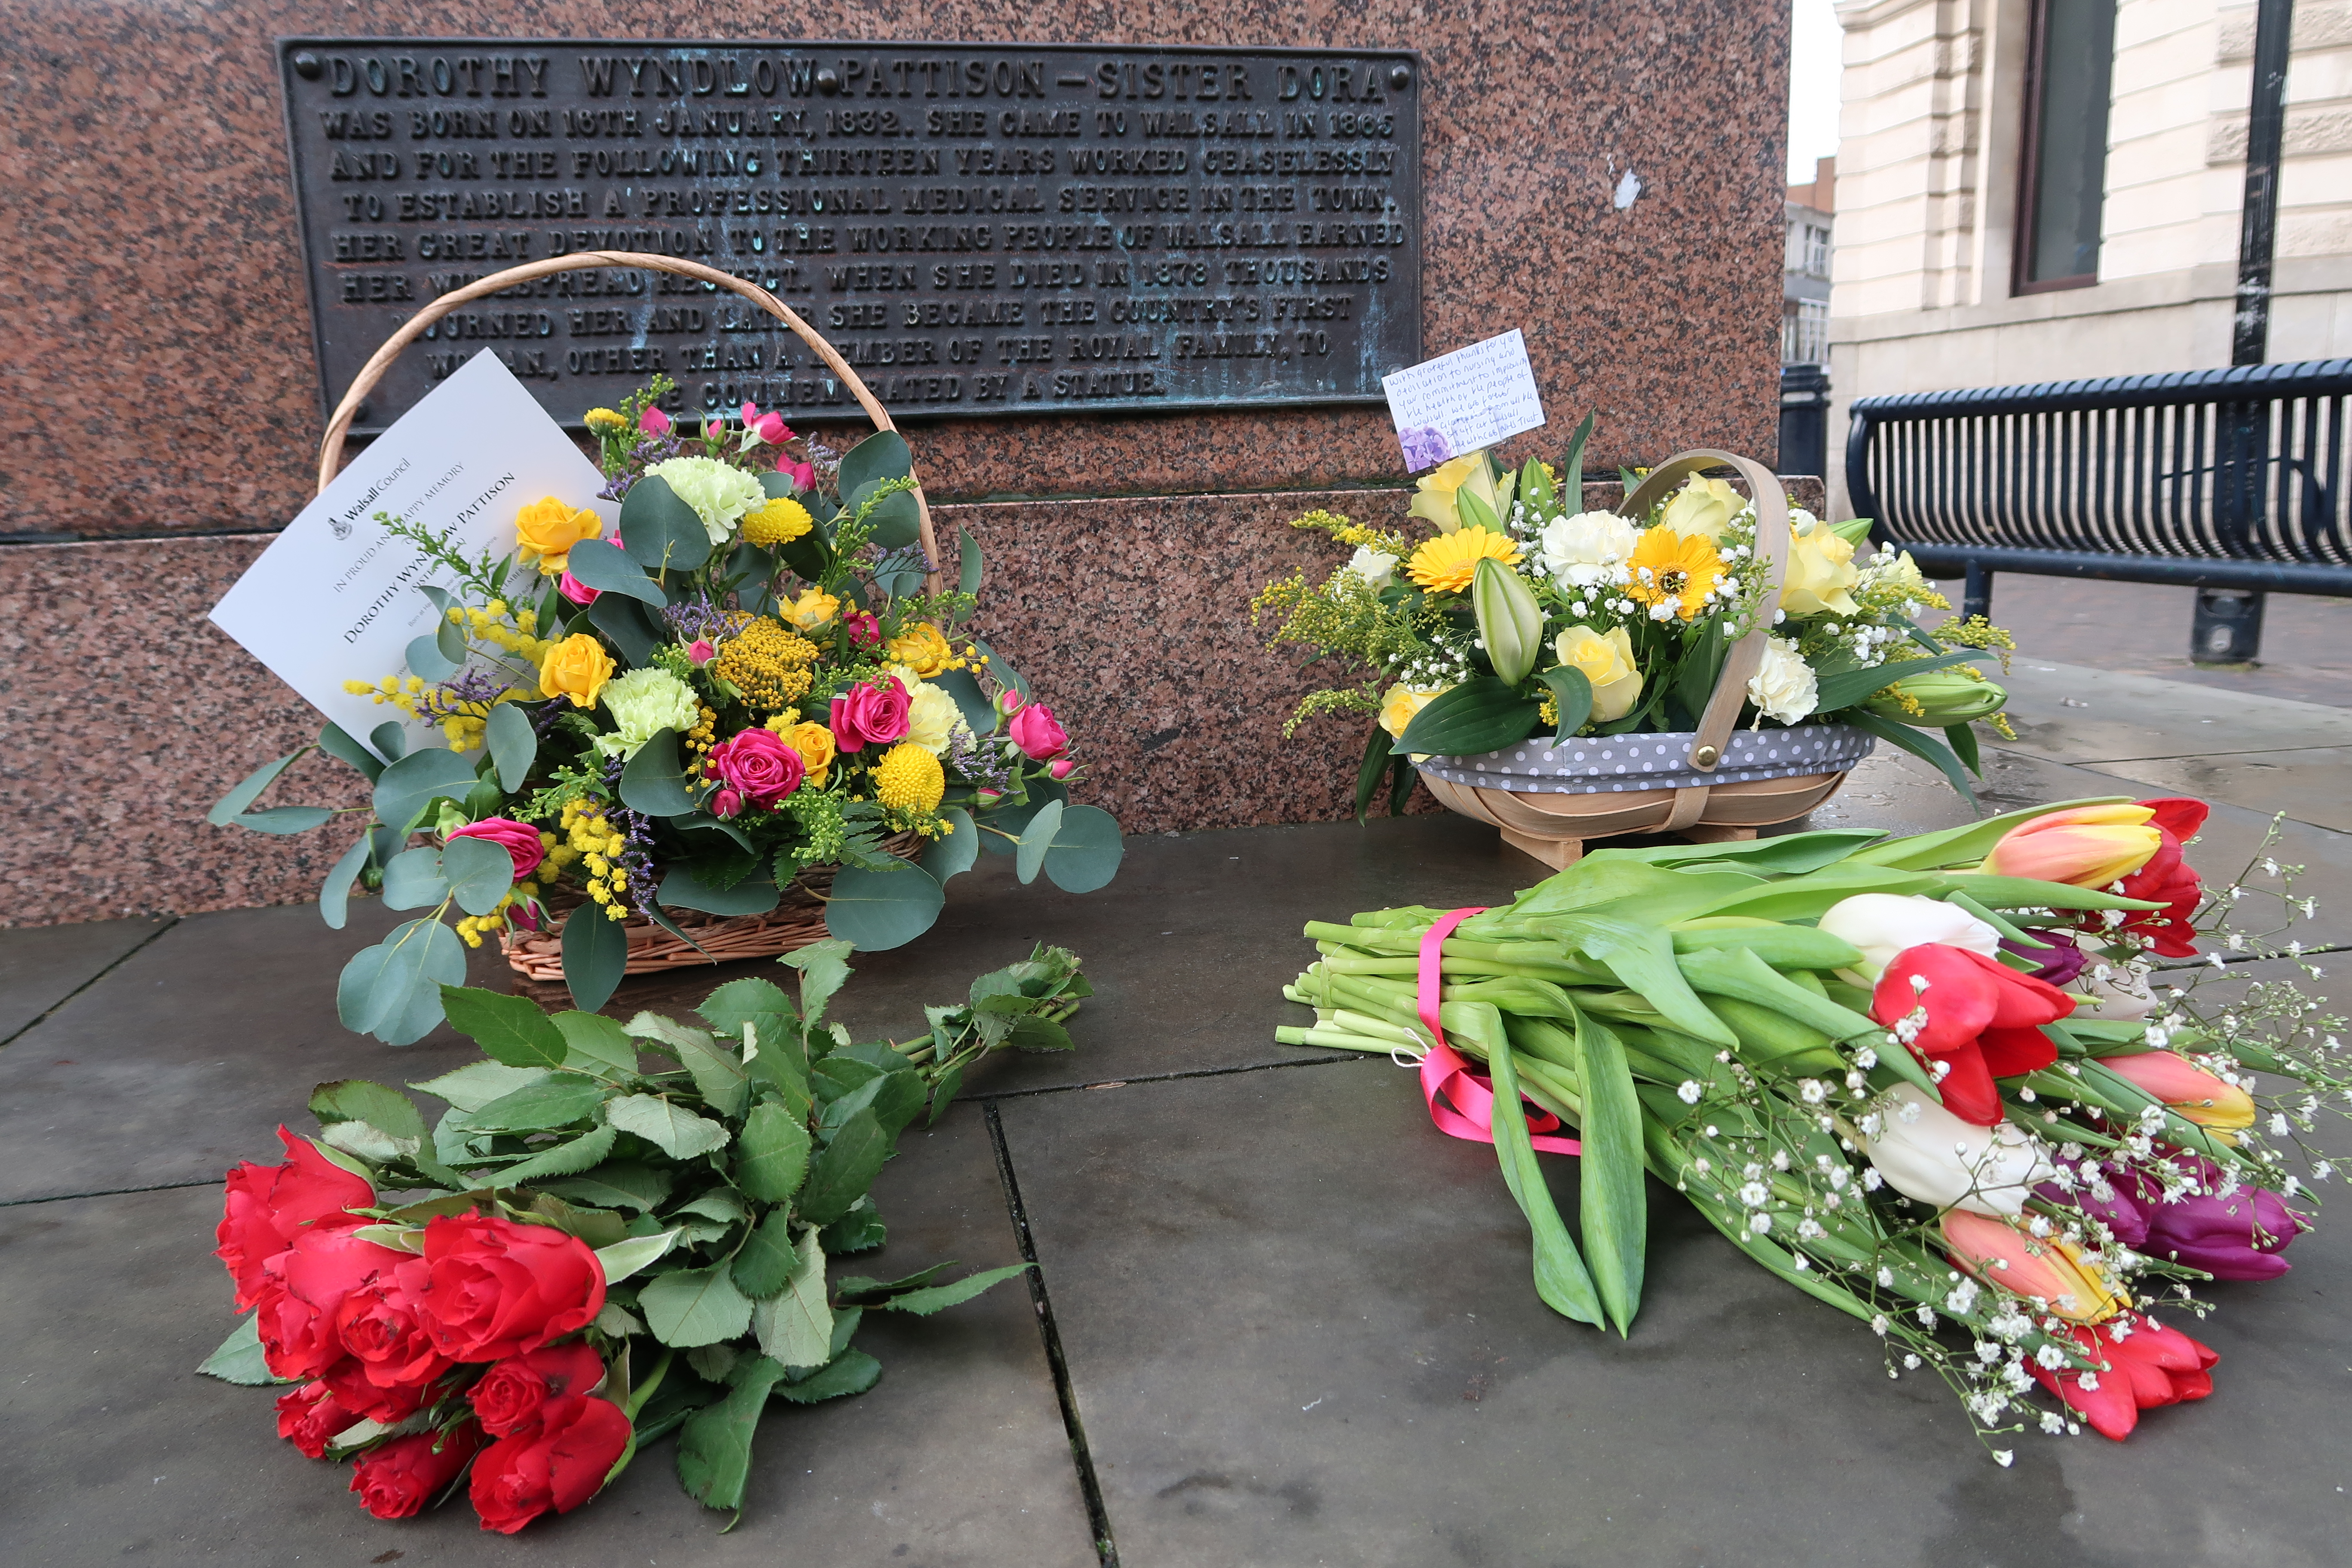 Floral tributes for Sister Dora at her statue in Walsall town centre